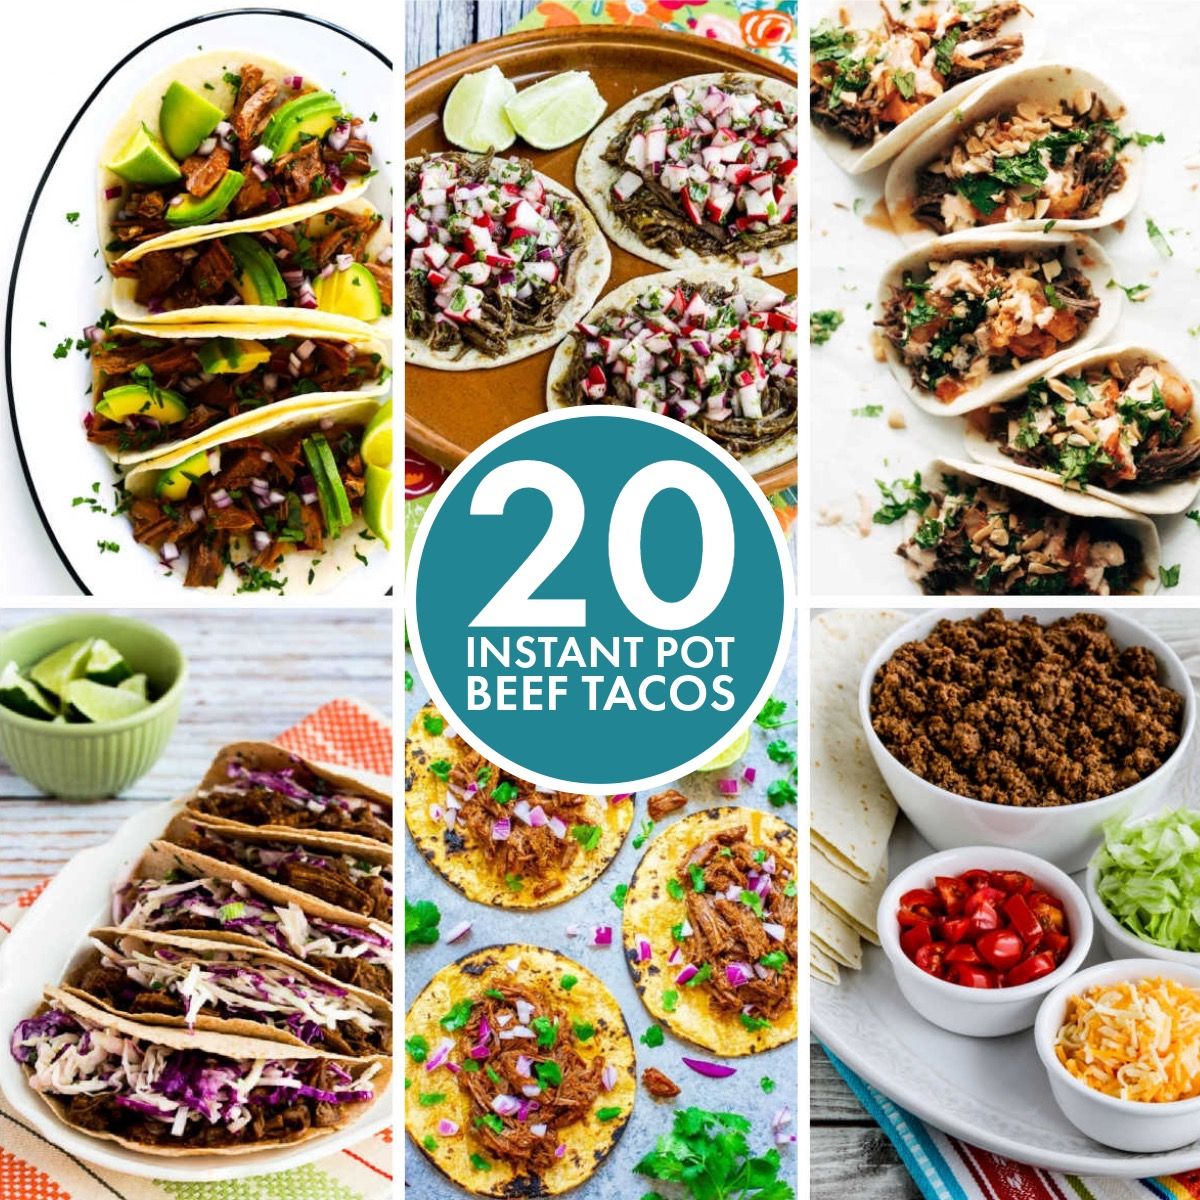 Collage image for 20 Instant Pot Beef Tacos showing featured recipes.